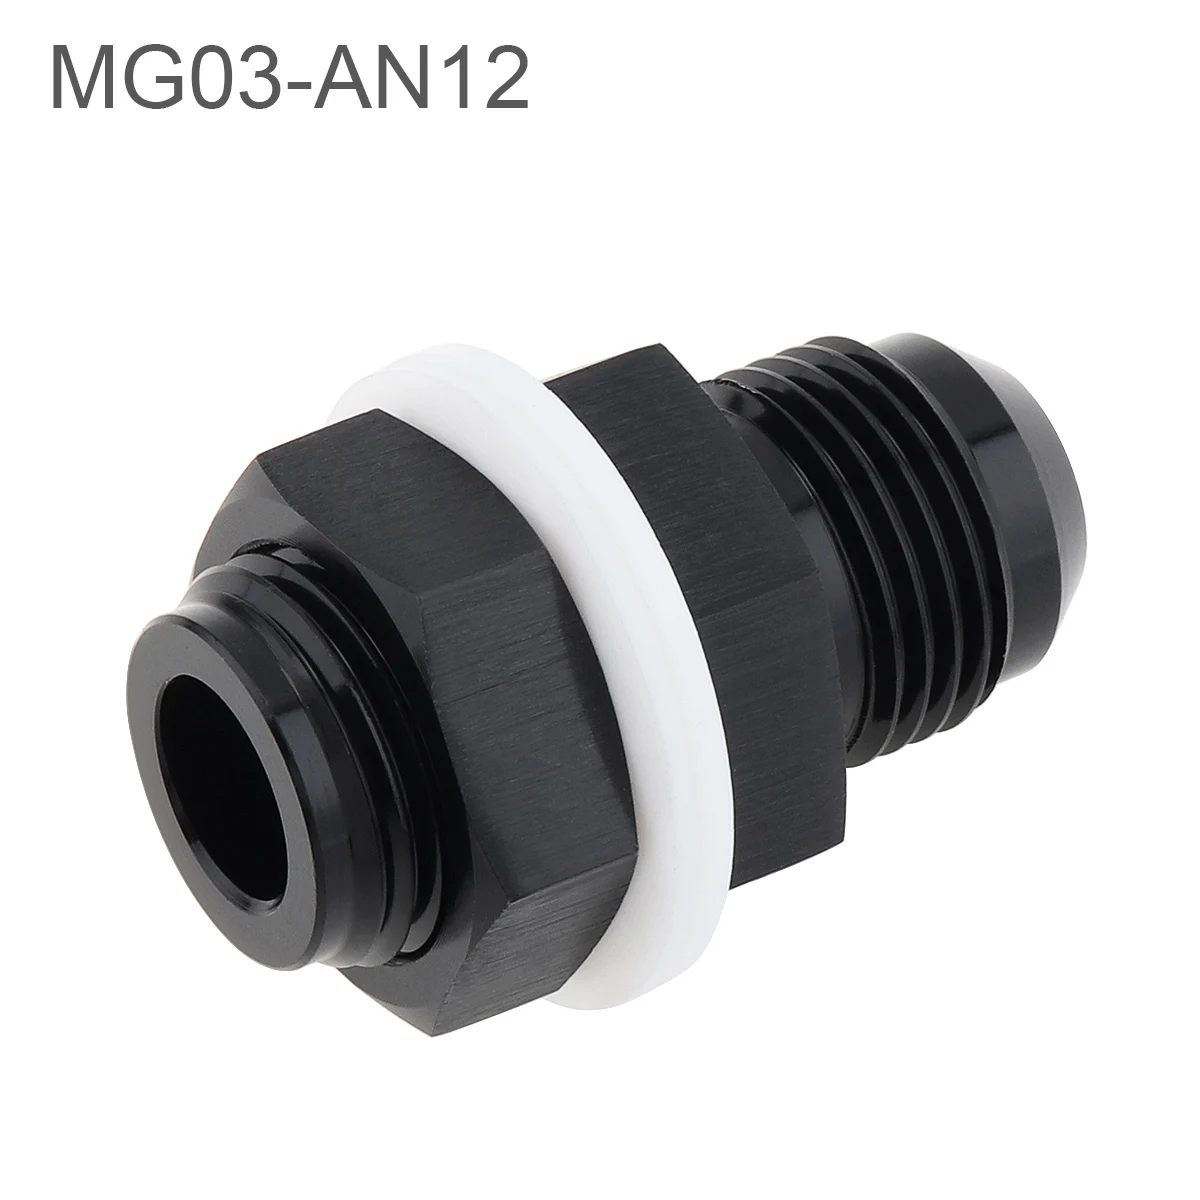 

1pc 12AN Fuel Cell Bulkhead Fitting Adapter Aluminum AN12 Locking Nut 12 AN Male Flare Thread with Teflon Washer